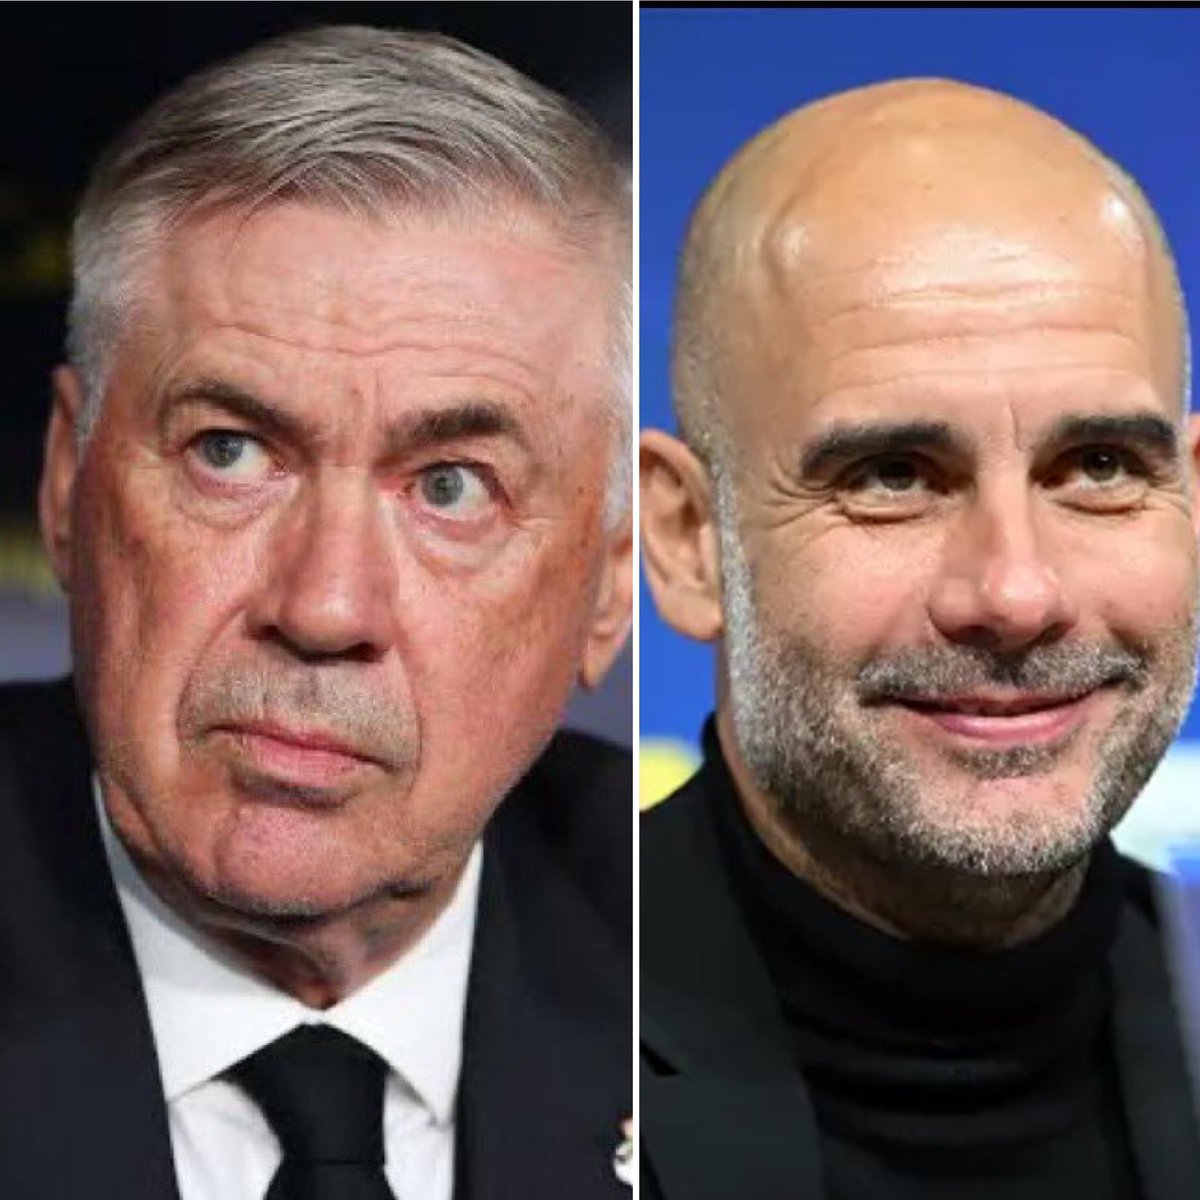 Your team is struggling in relegation zone and you must sign a coach between; Carlos Ancelotti Pep Guardiola Which coach would you sign to rescue your team?👀🤔